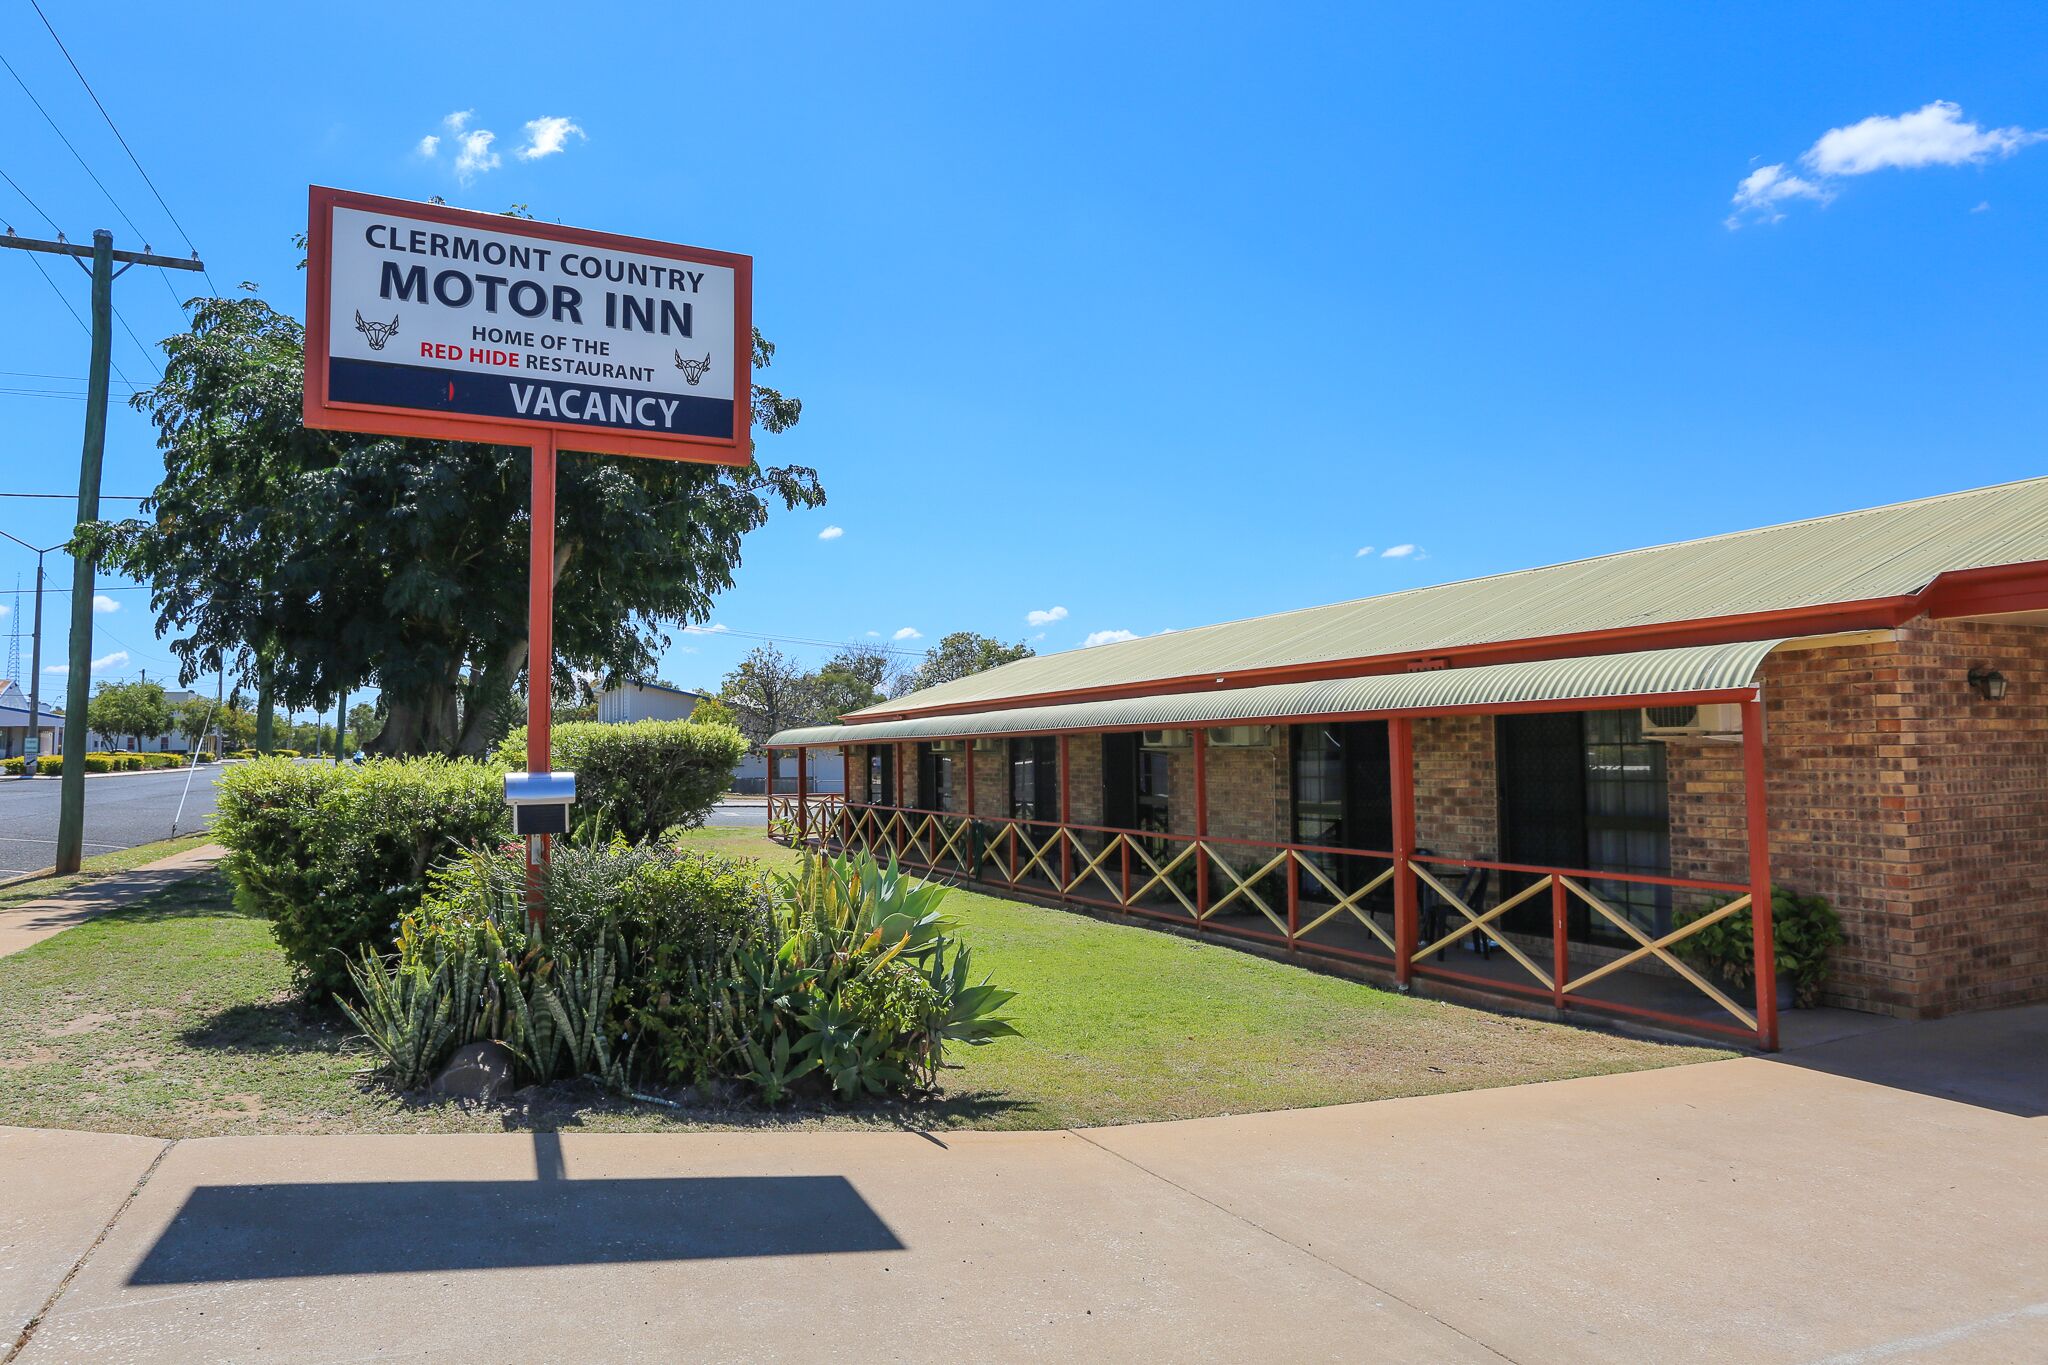 Clermont Country Motor Inn